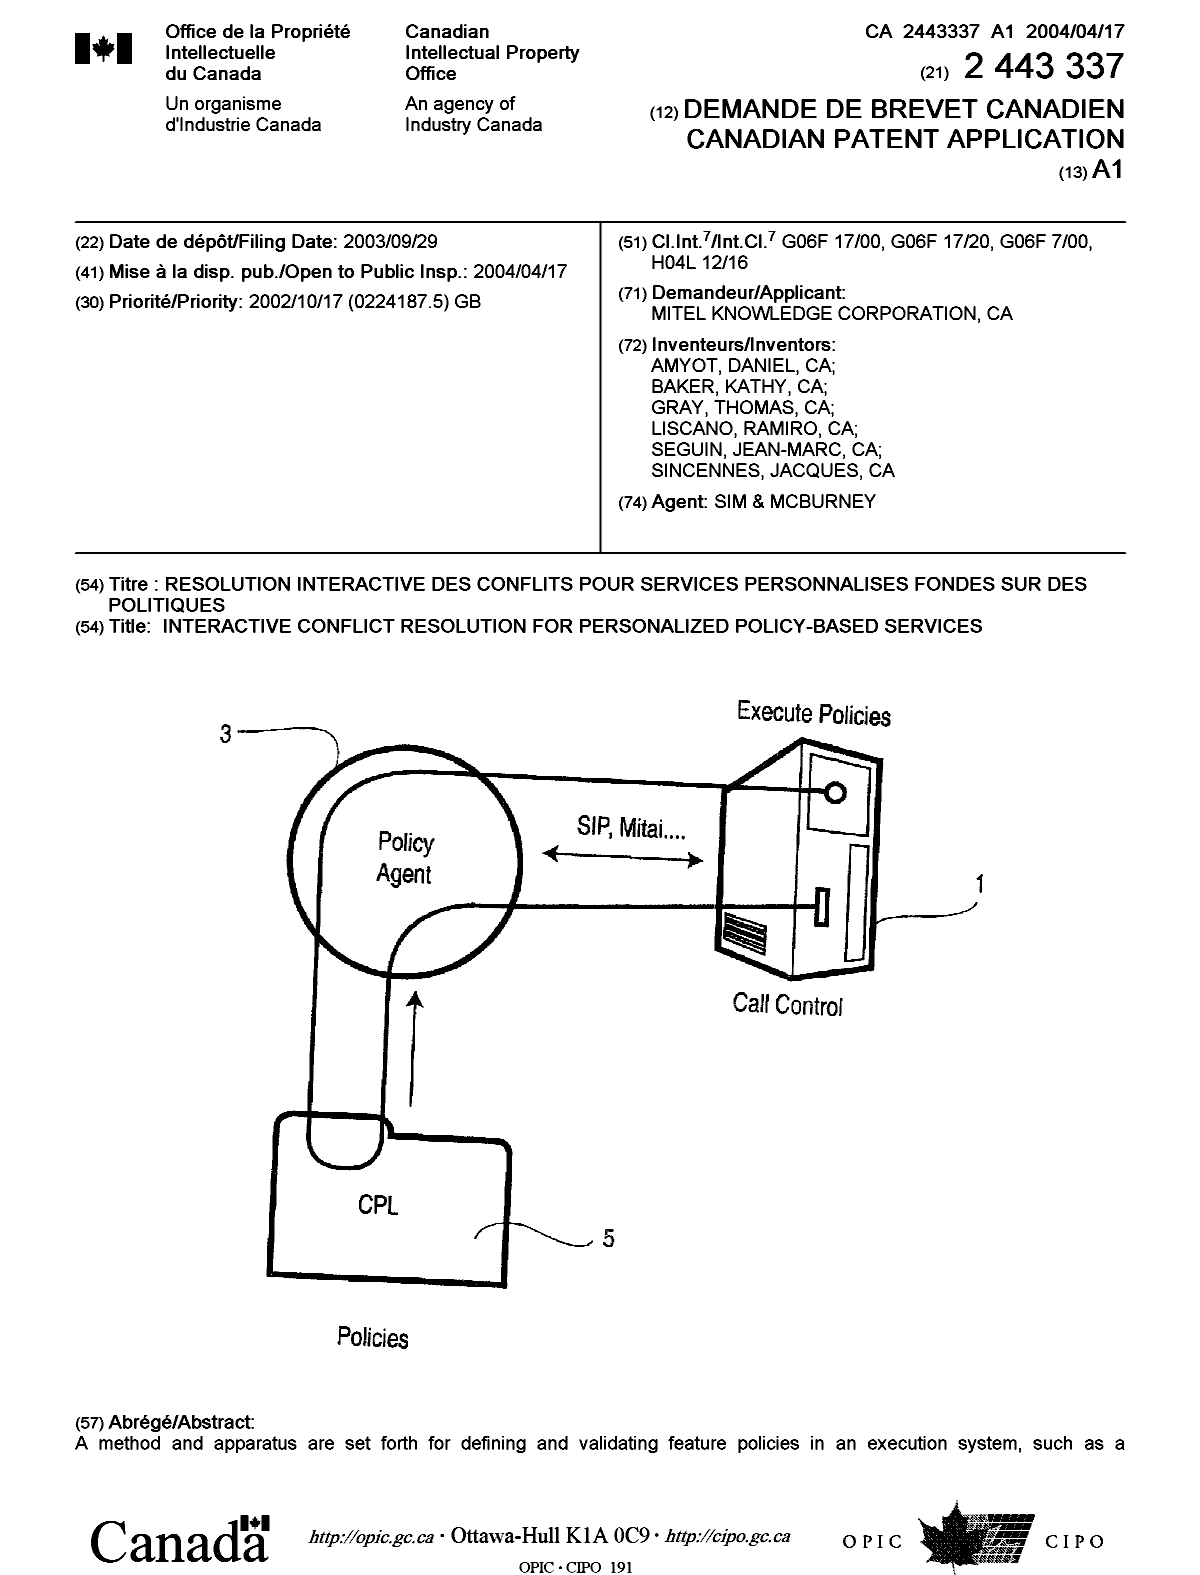 Canadian Patent Document 2443337. Cover Page 20040322. Image 1 of 2